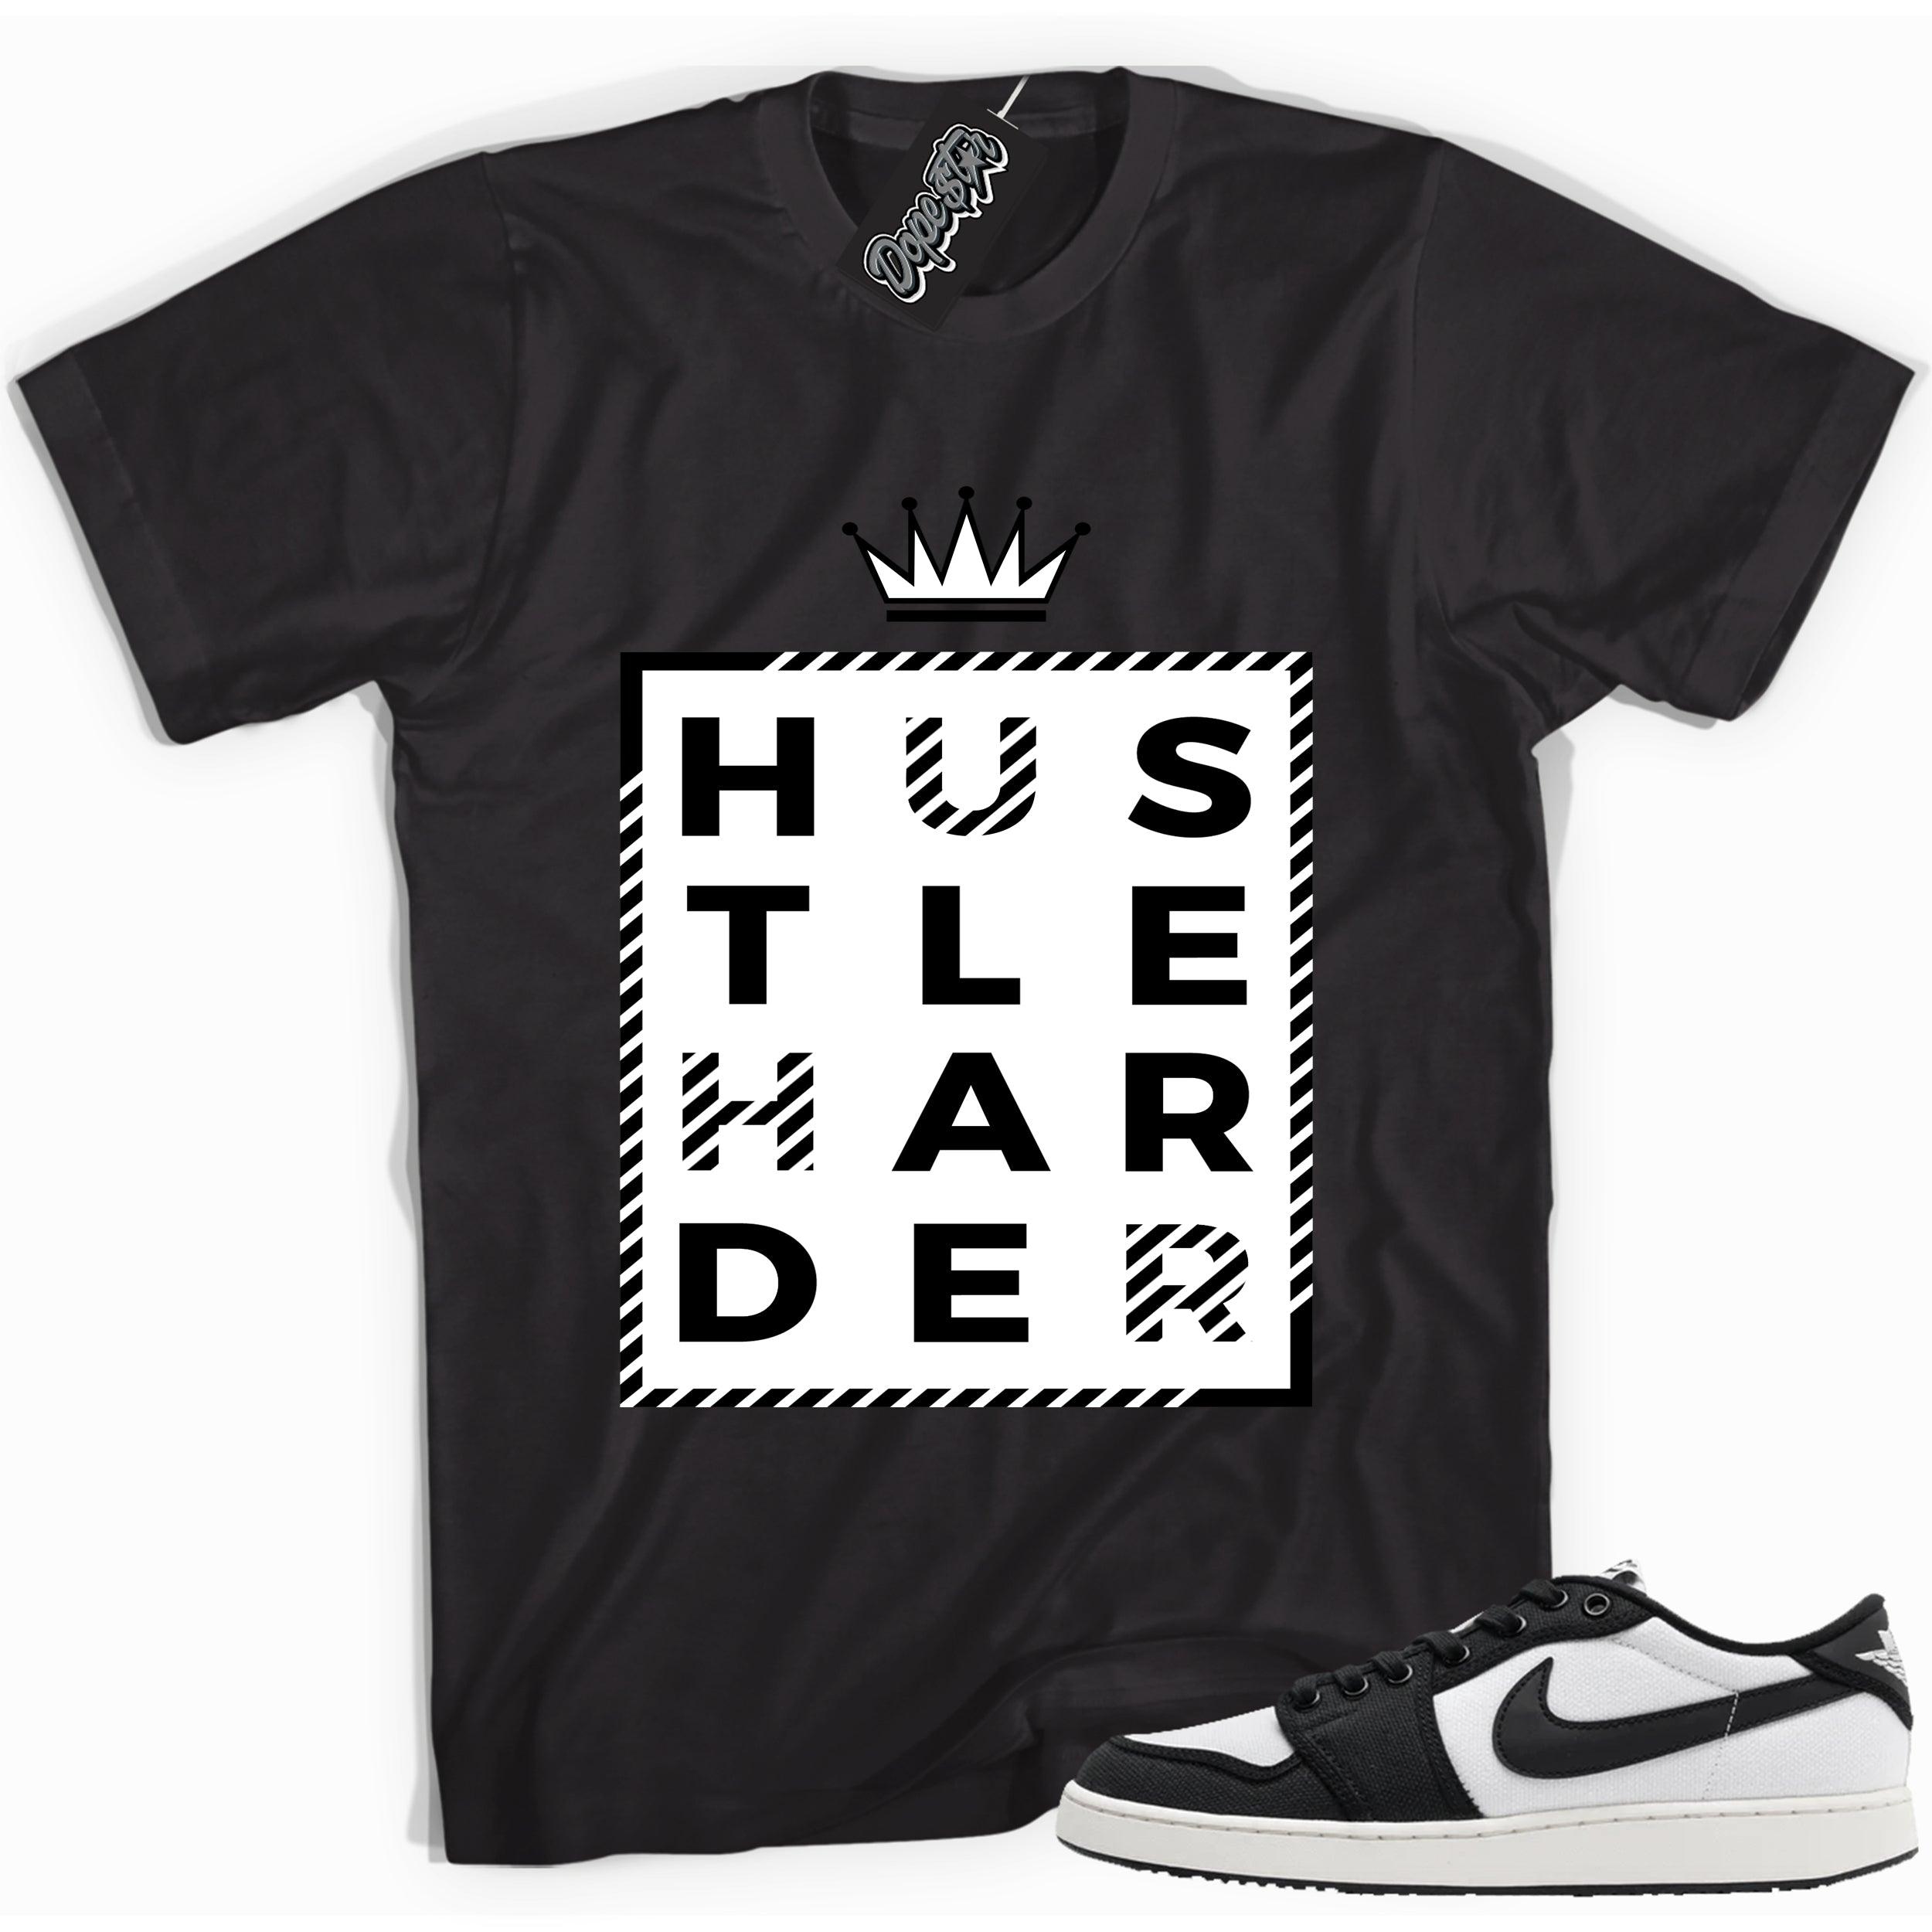 Cool black graphic tee with 'hustle harder' print, that perfectly matches Air Jordan 1 Retro Ajko Low Black & White sneakers.